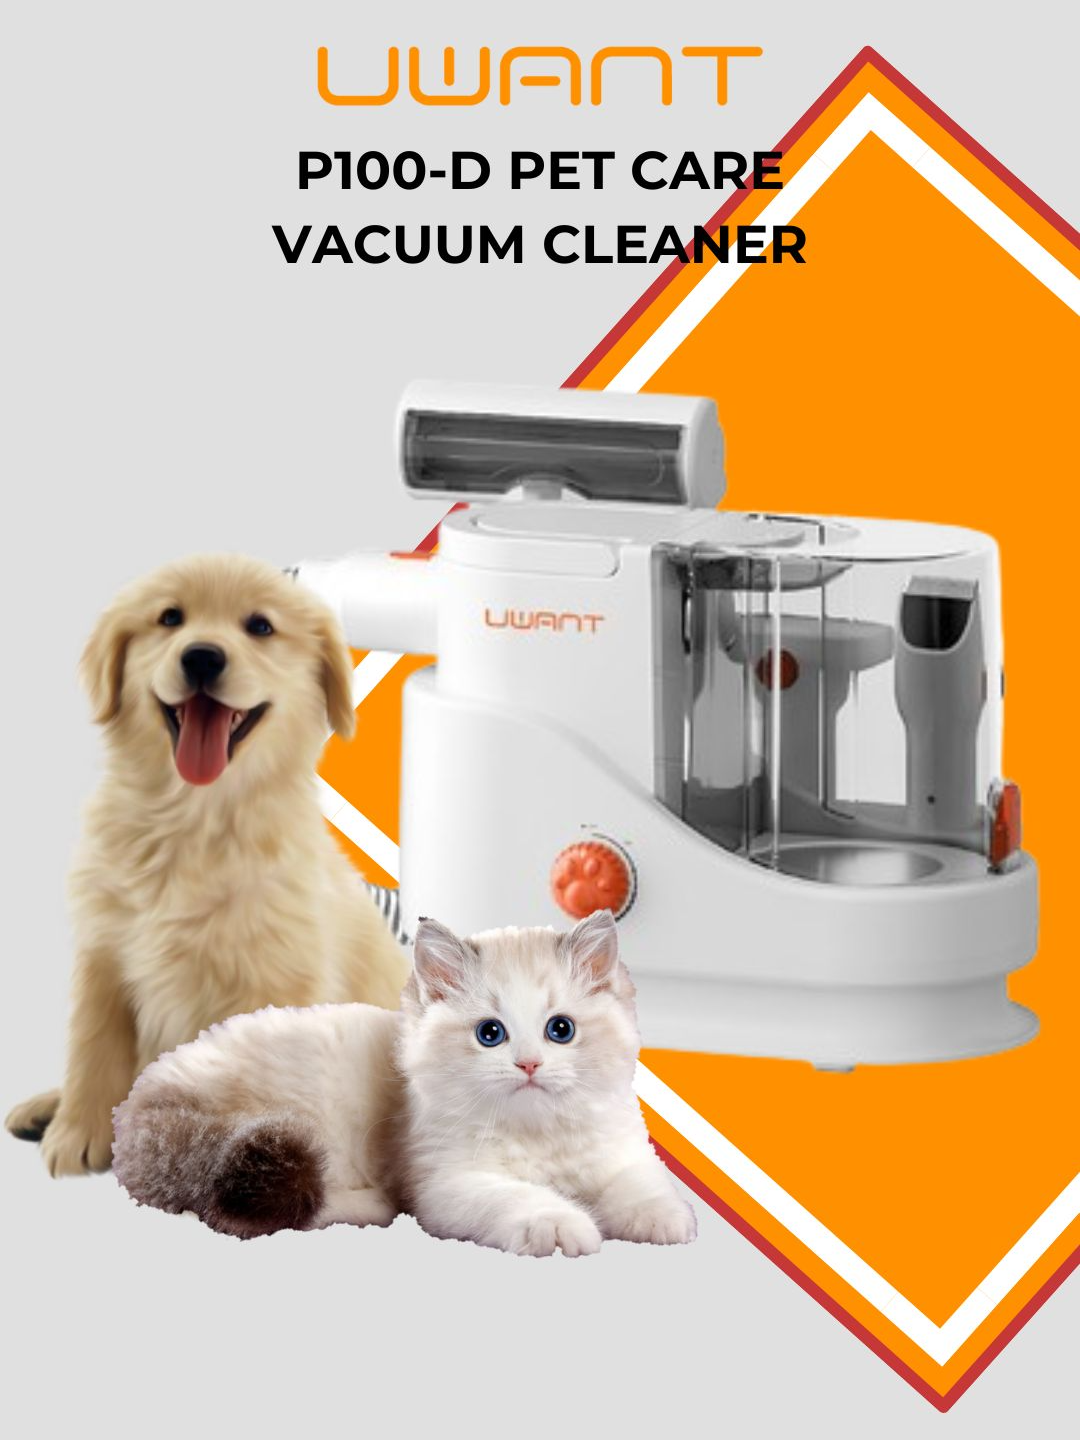 Vacuuming made easy fur real! Uwant P100D gets the job done, no bones about it. #PetFriendlyCleaning #UWANTClean #uwant #uwantphilippines #vacuum #vacuumcleaner